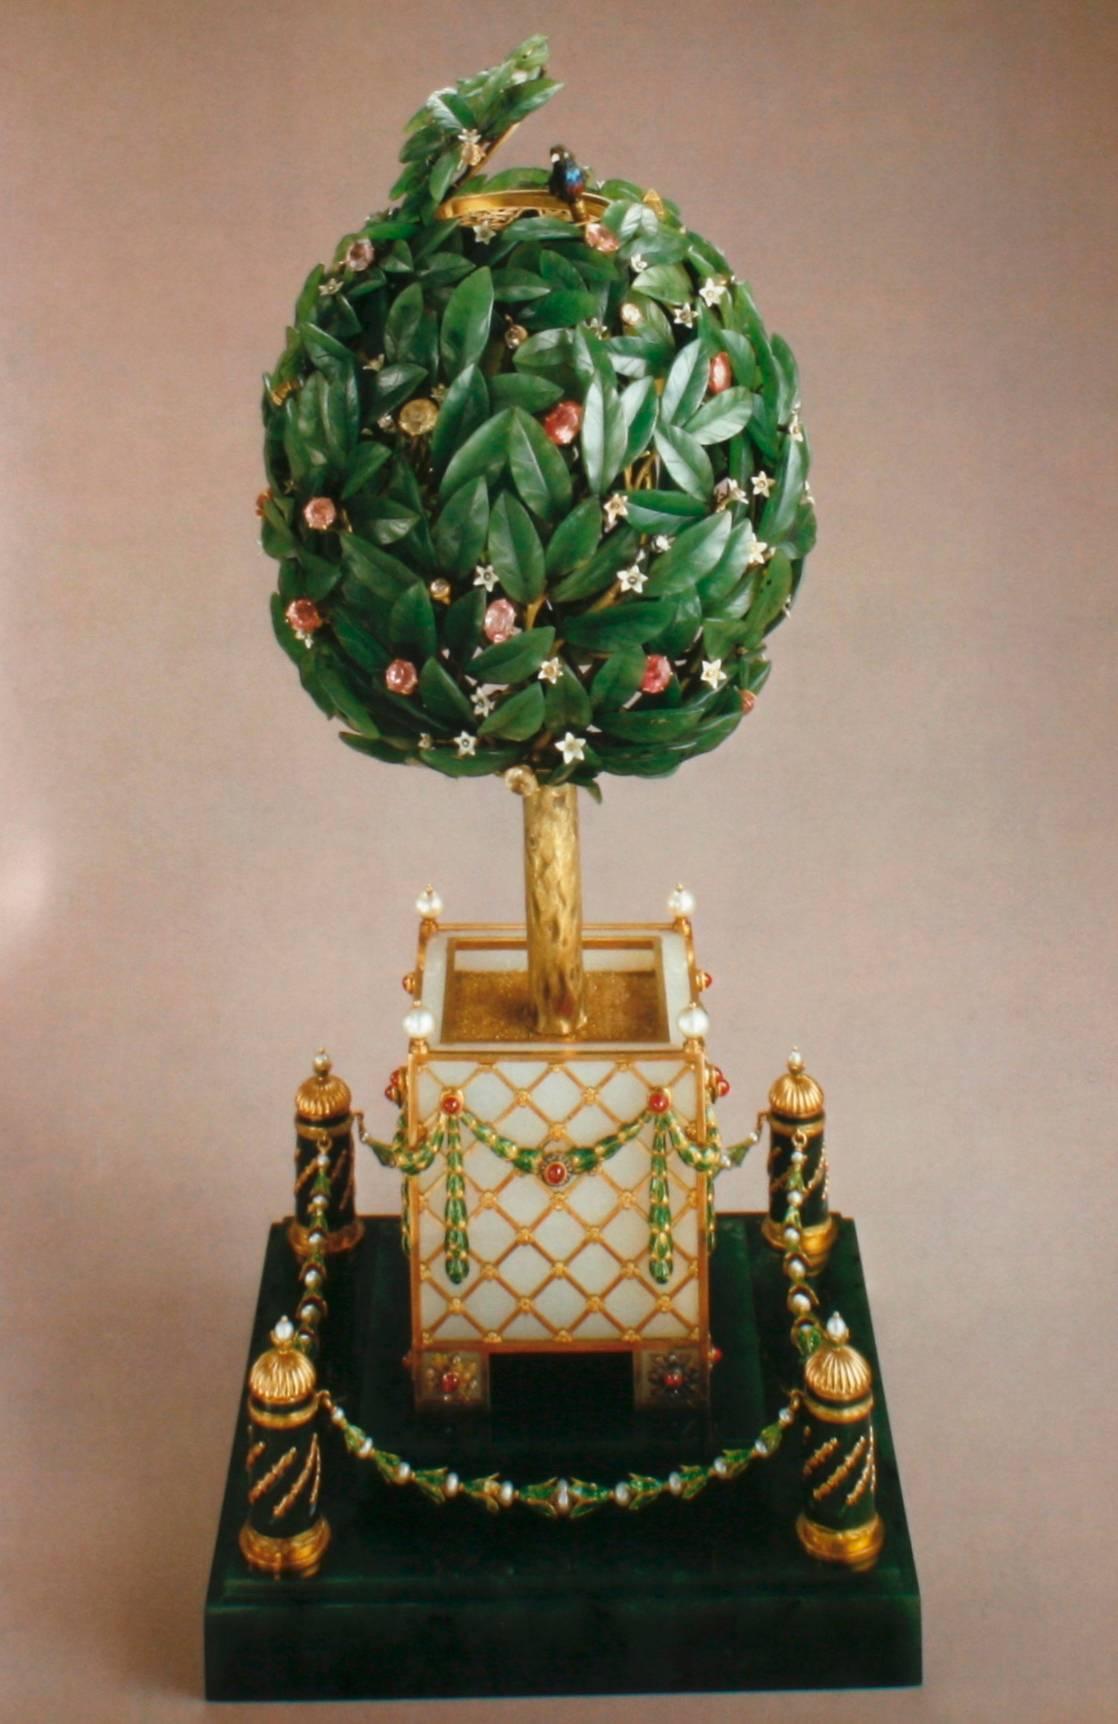 first faberge egg